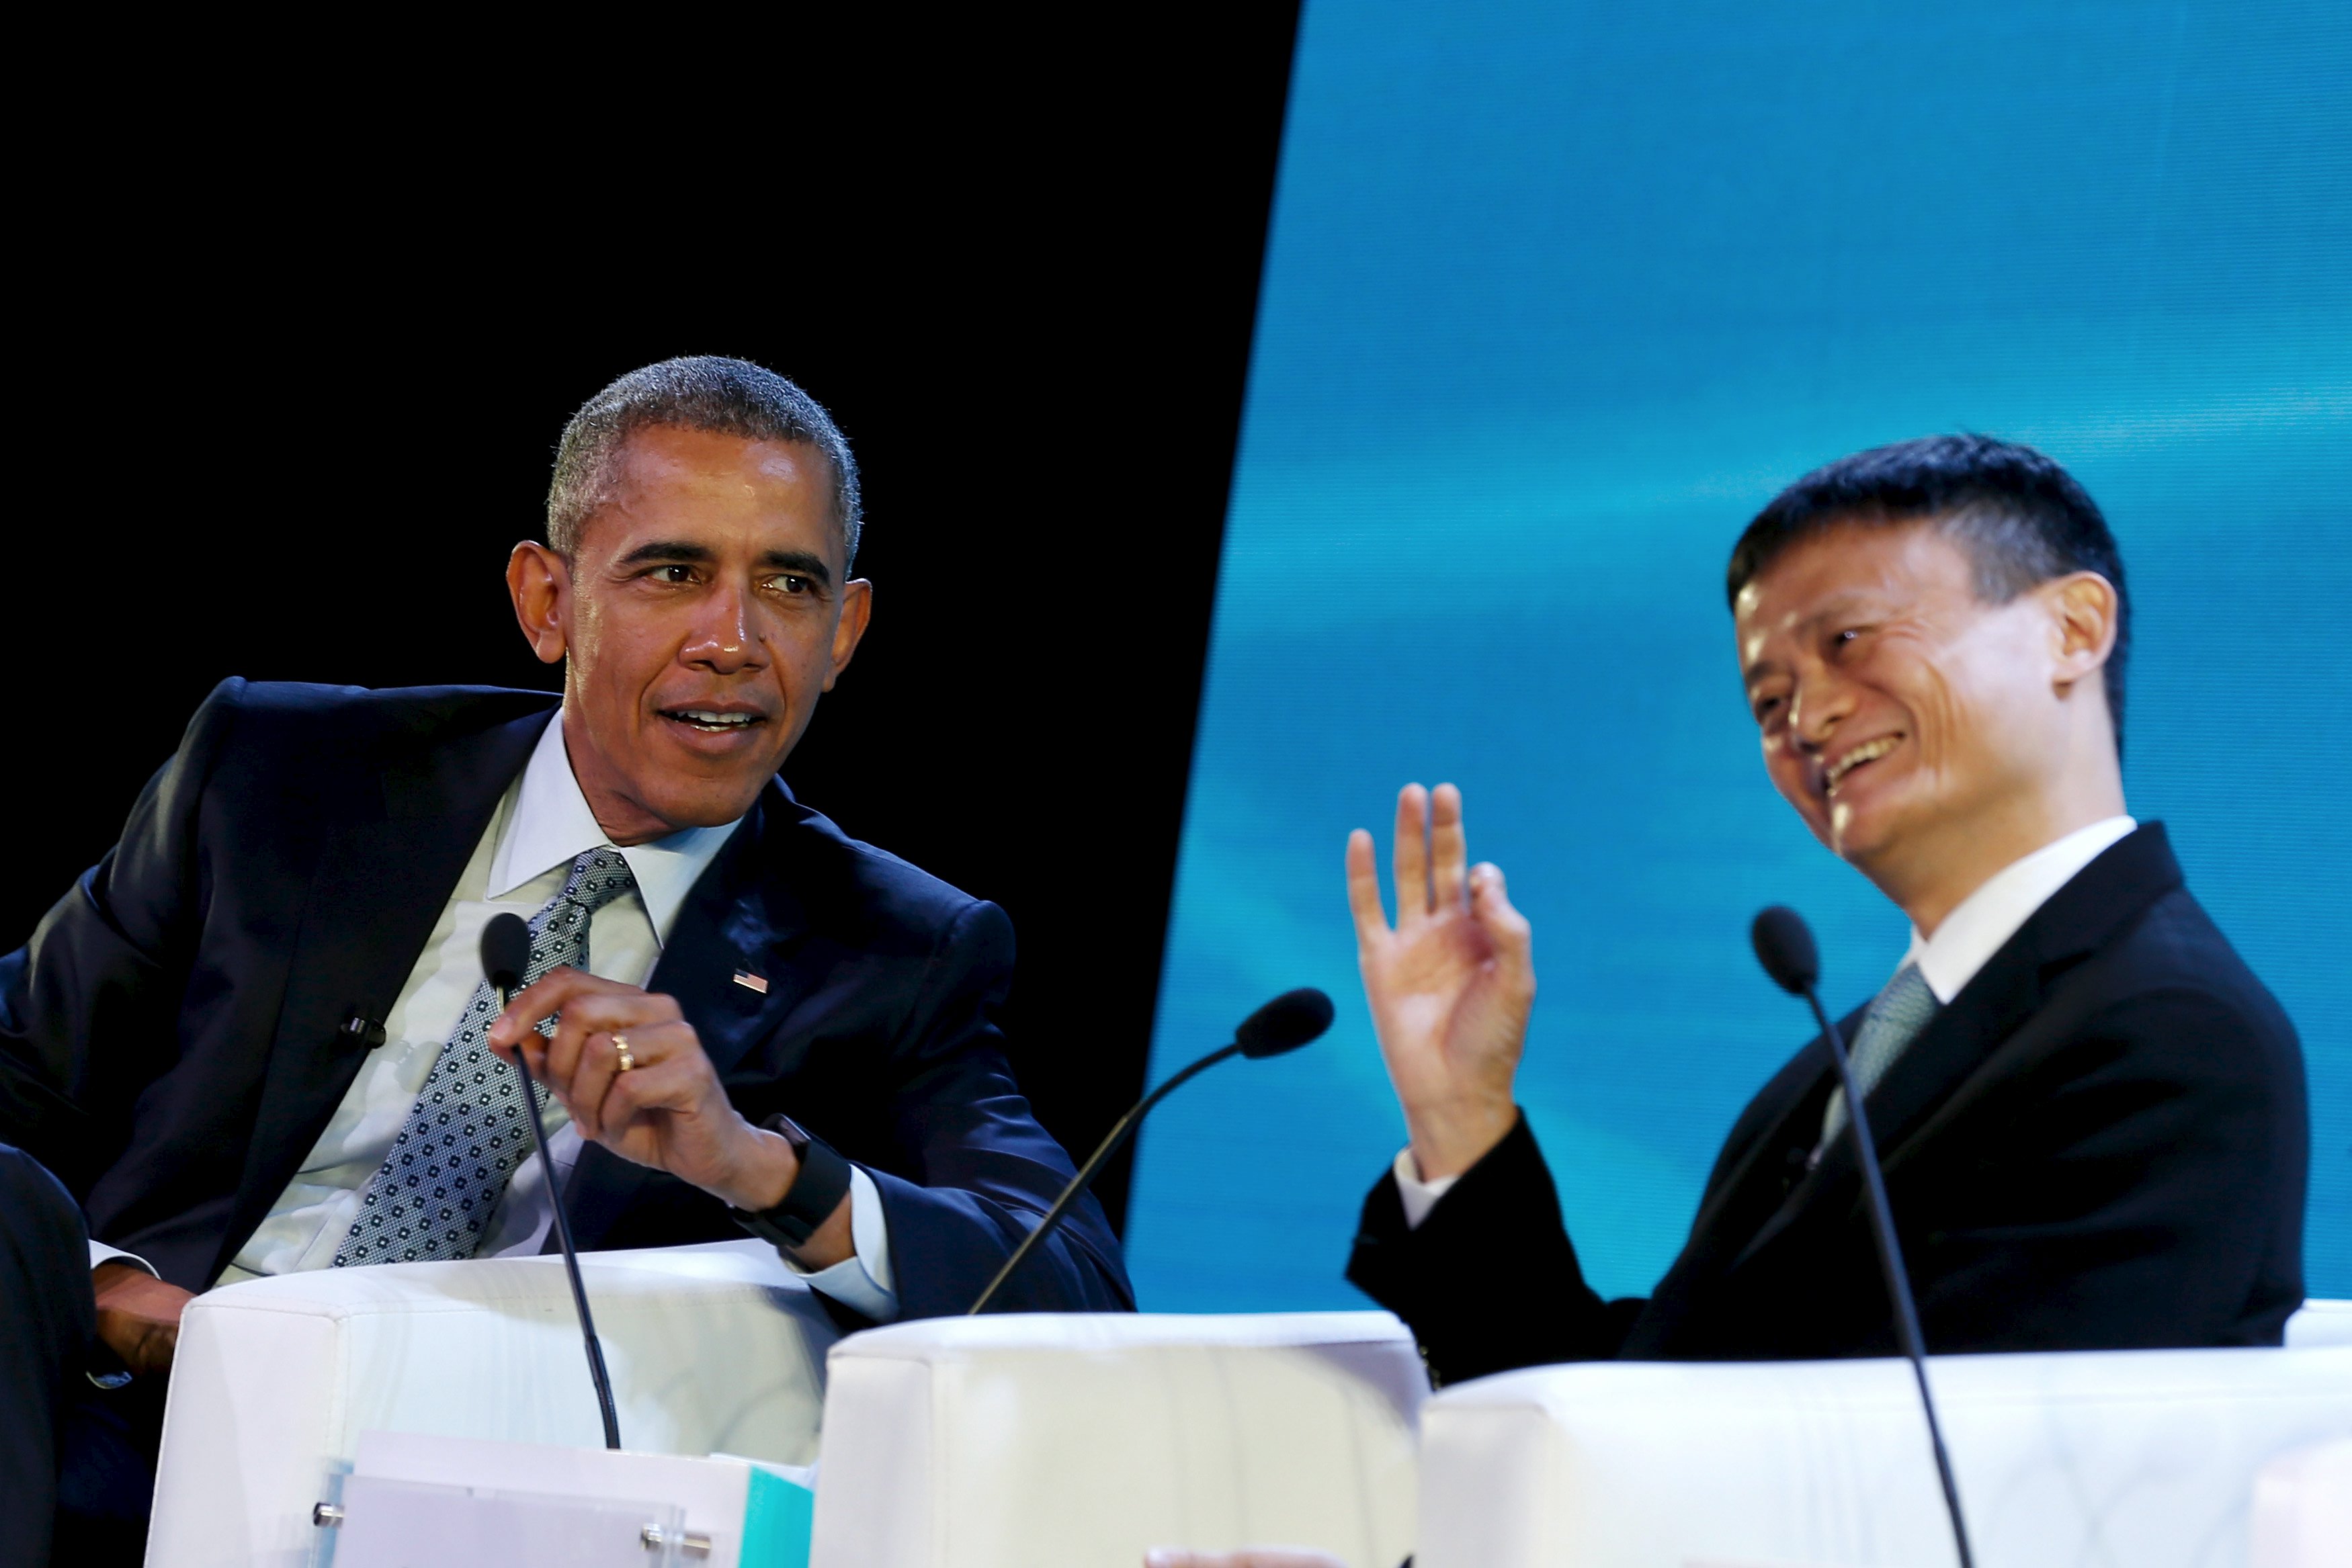 U.S. President Barack Obama (L) and Alibaba CEO Jack Ma participate in a panel discussion at the APEC CEO Summit in Manila, Philippines, November 18, 2015. REUTERS/Jonathan Ernst